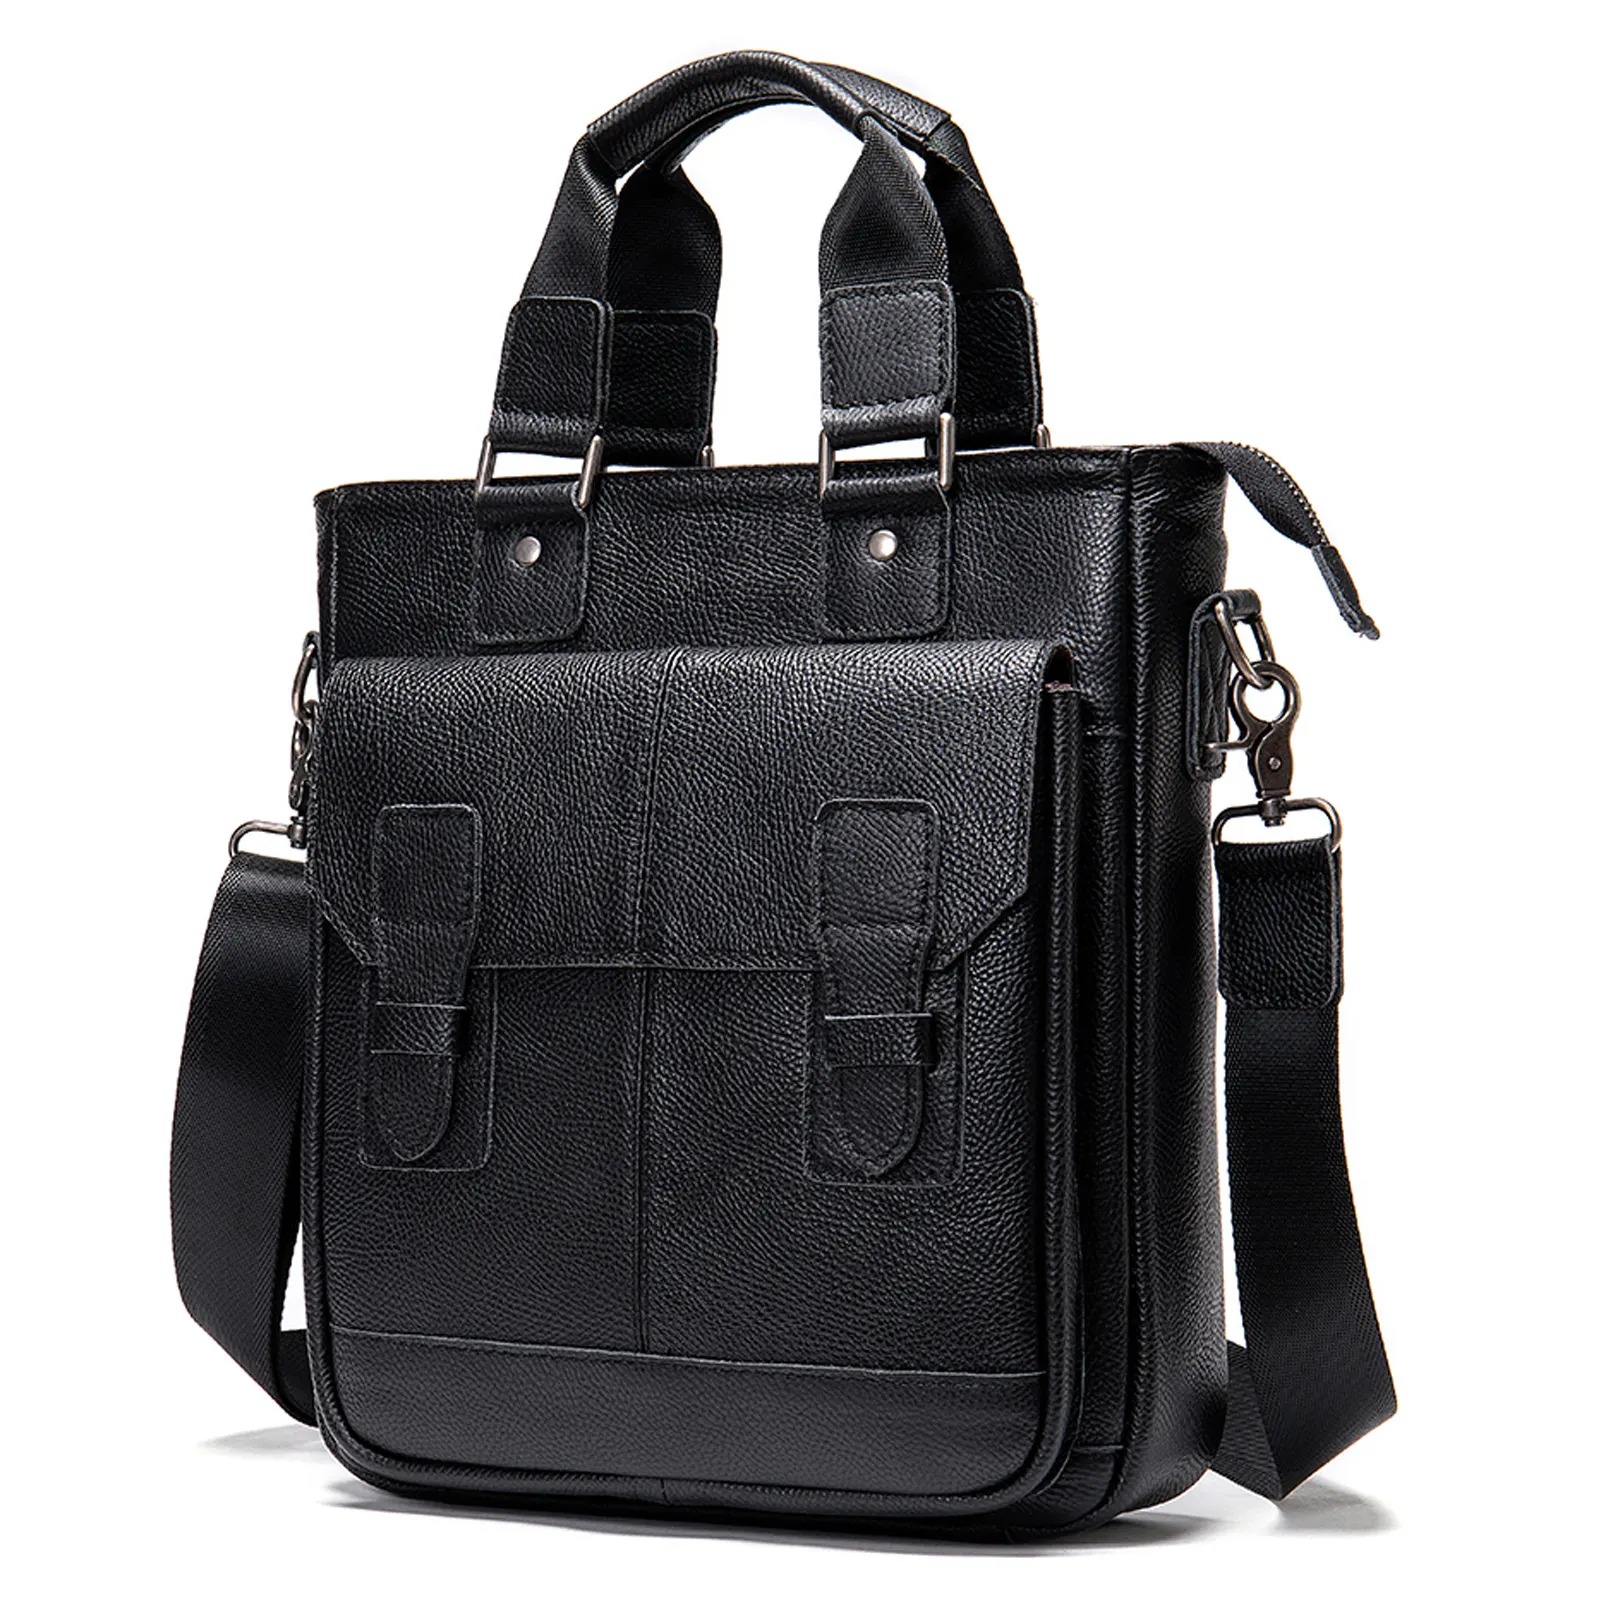 Wholesale Casual Business Vertical Fashion Shoulder Bag High Quality Genuine Leather Small Messenger Hand Briefcase For Man